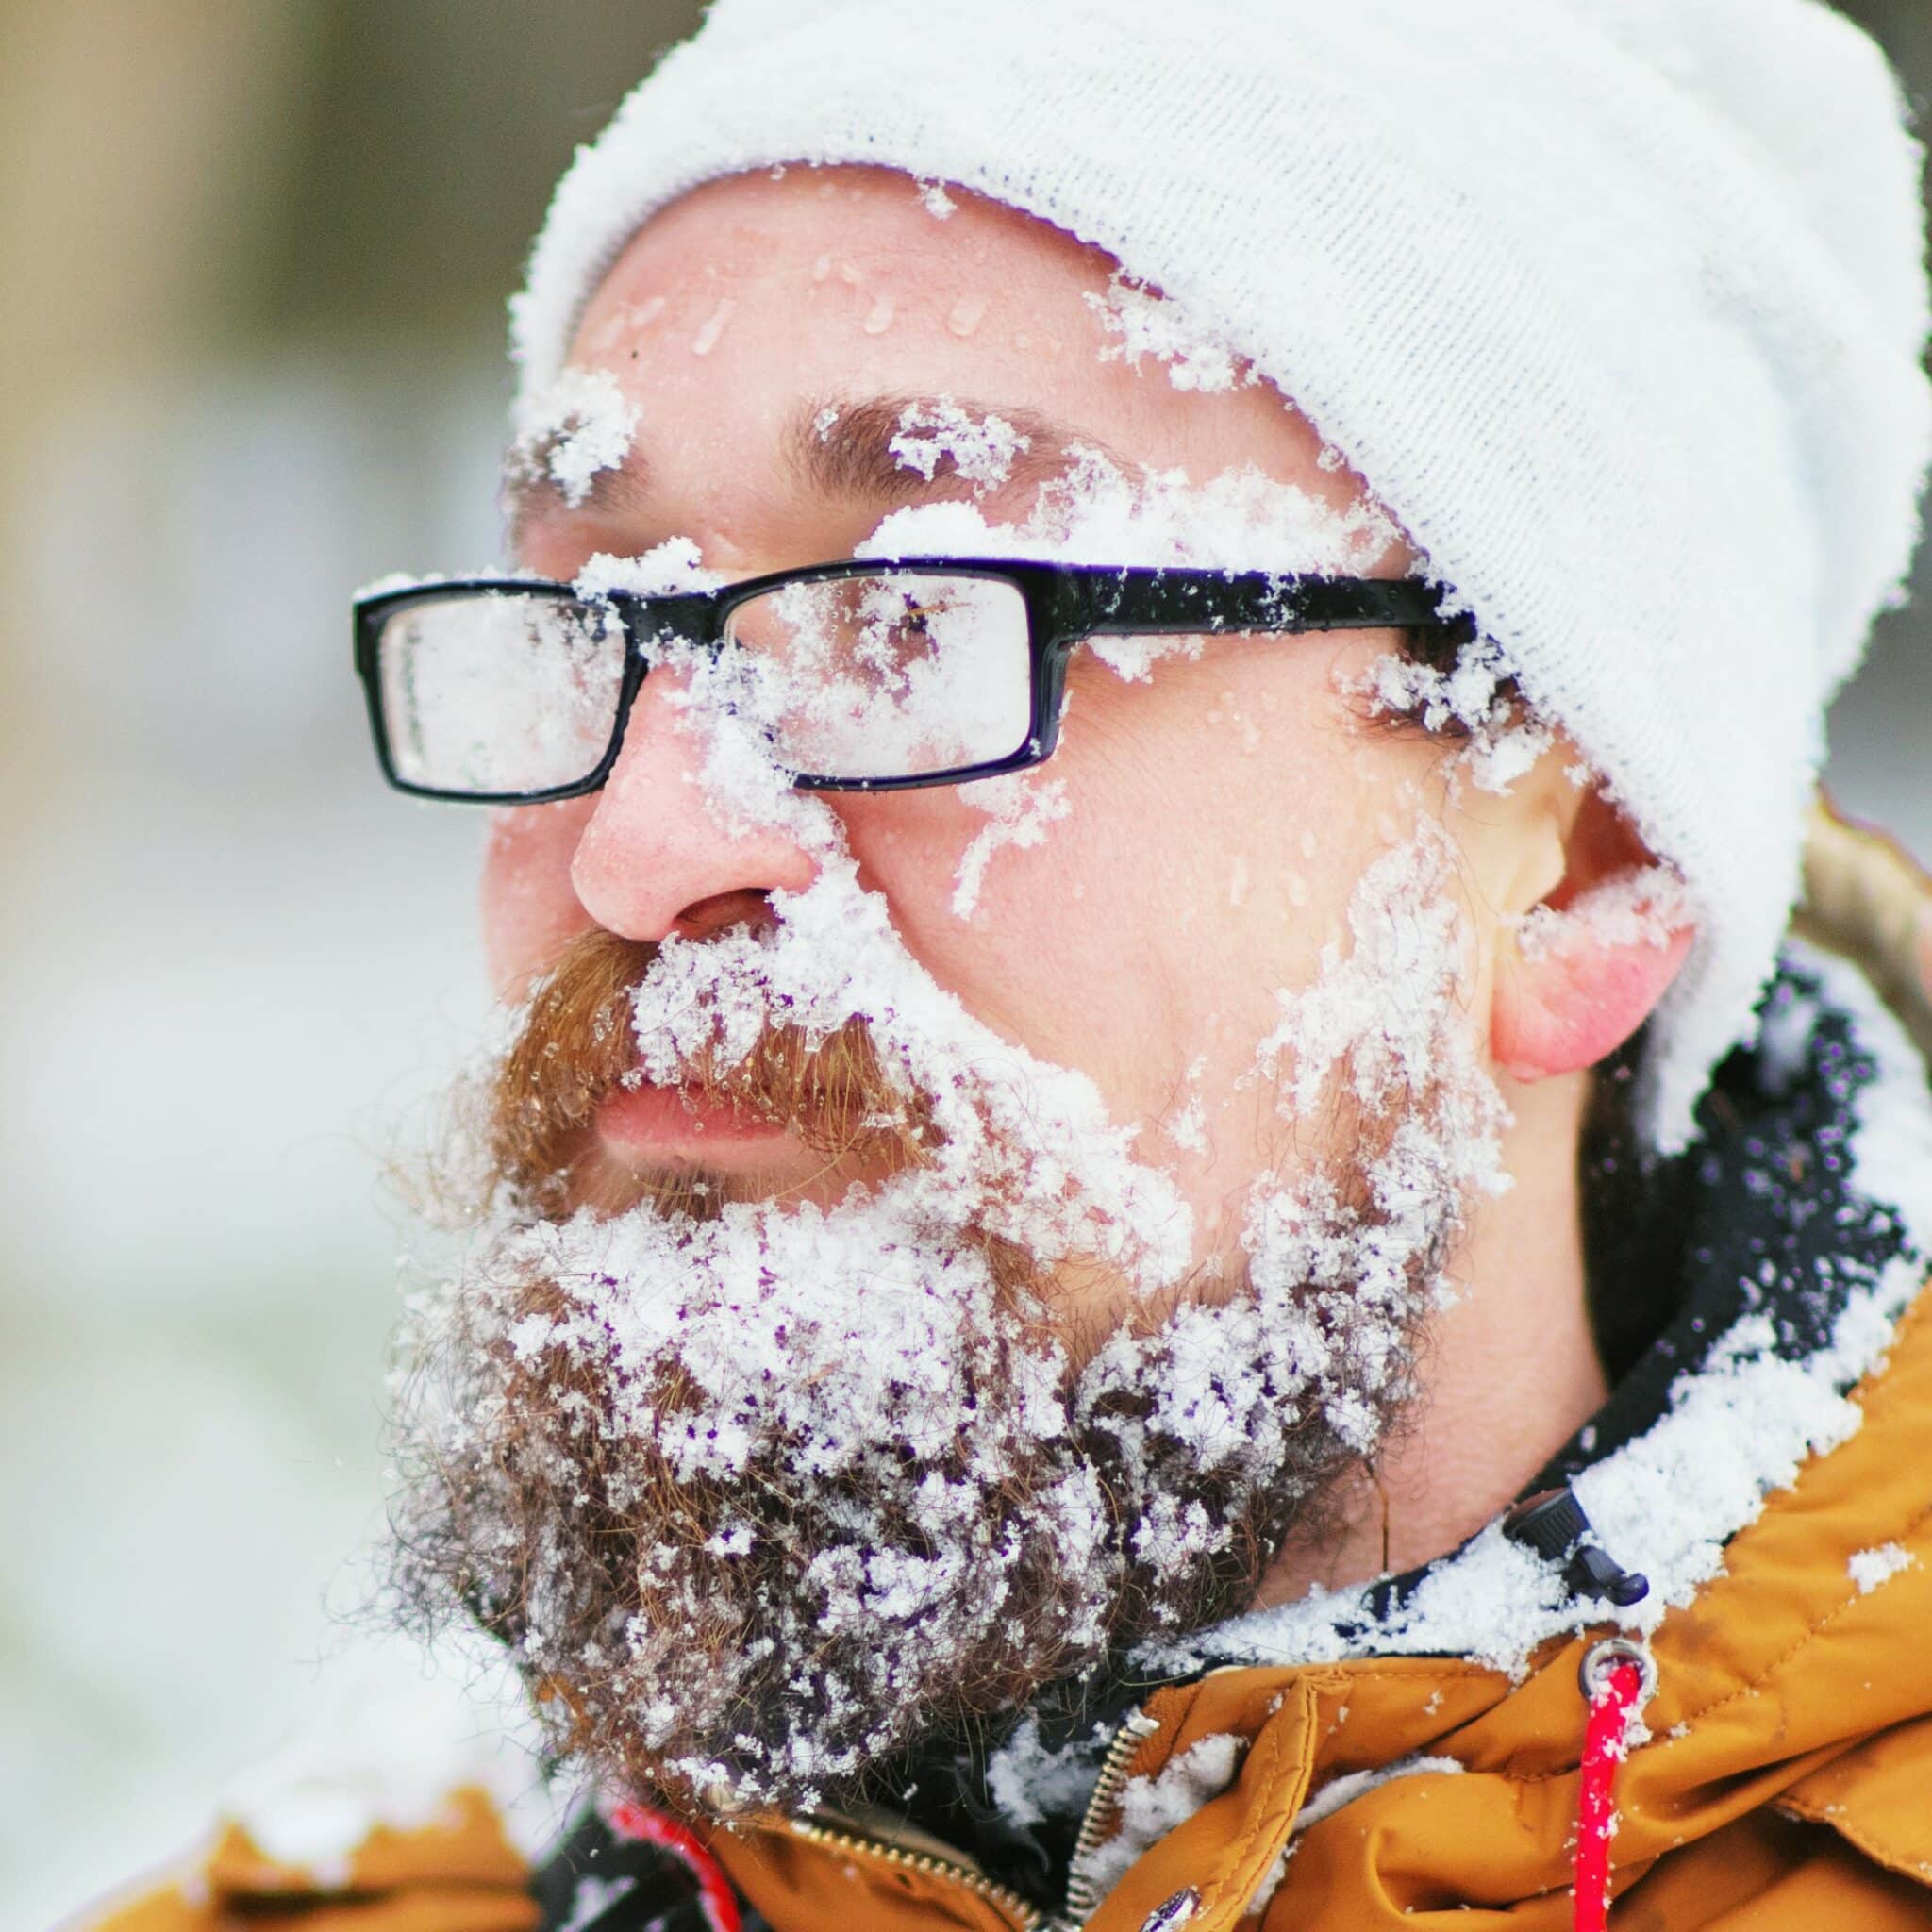 Middle-aged man wearing white beanie, black rectangular glasses, and a yellow snow coat, standing outside. He has light skin and a red beard. His beard and glasses are stuffed with snow, creating a comical appearance. It reminds inspectors to dress appropriately when dealing with home inspections during extreme weather.